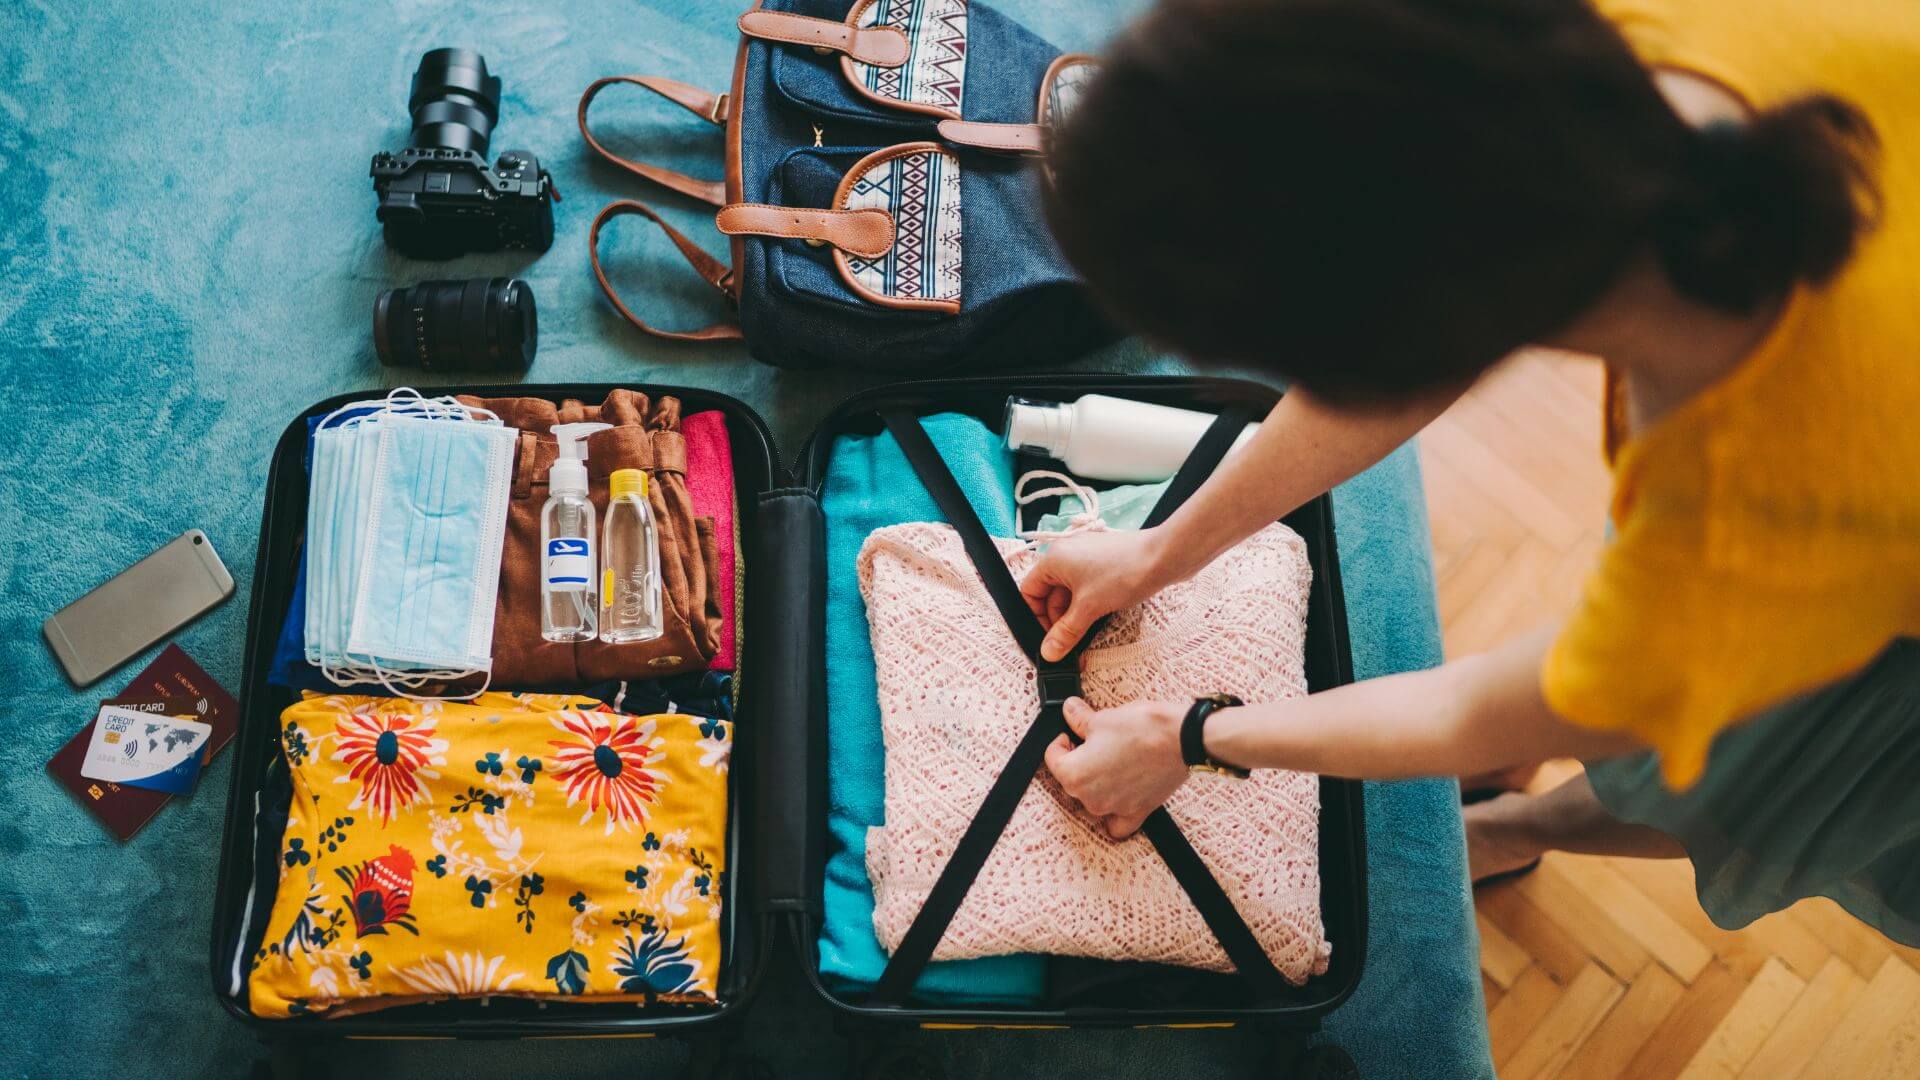 The Ultimate Carry On Packing List After 12 Years of Travel